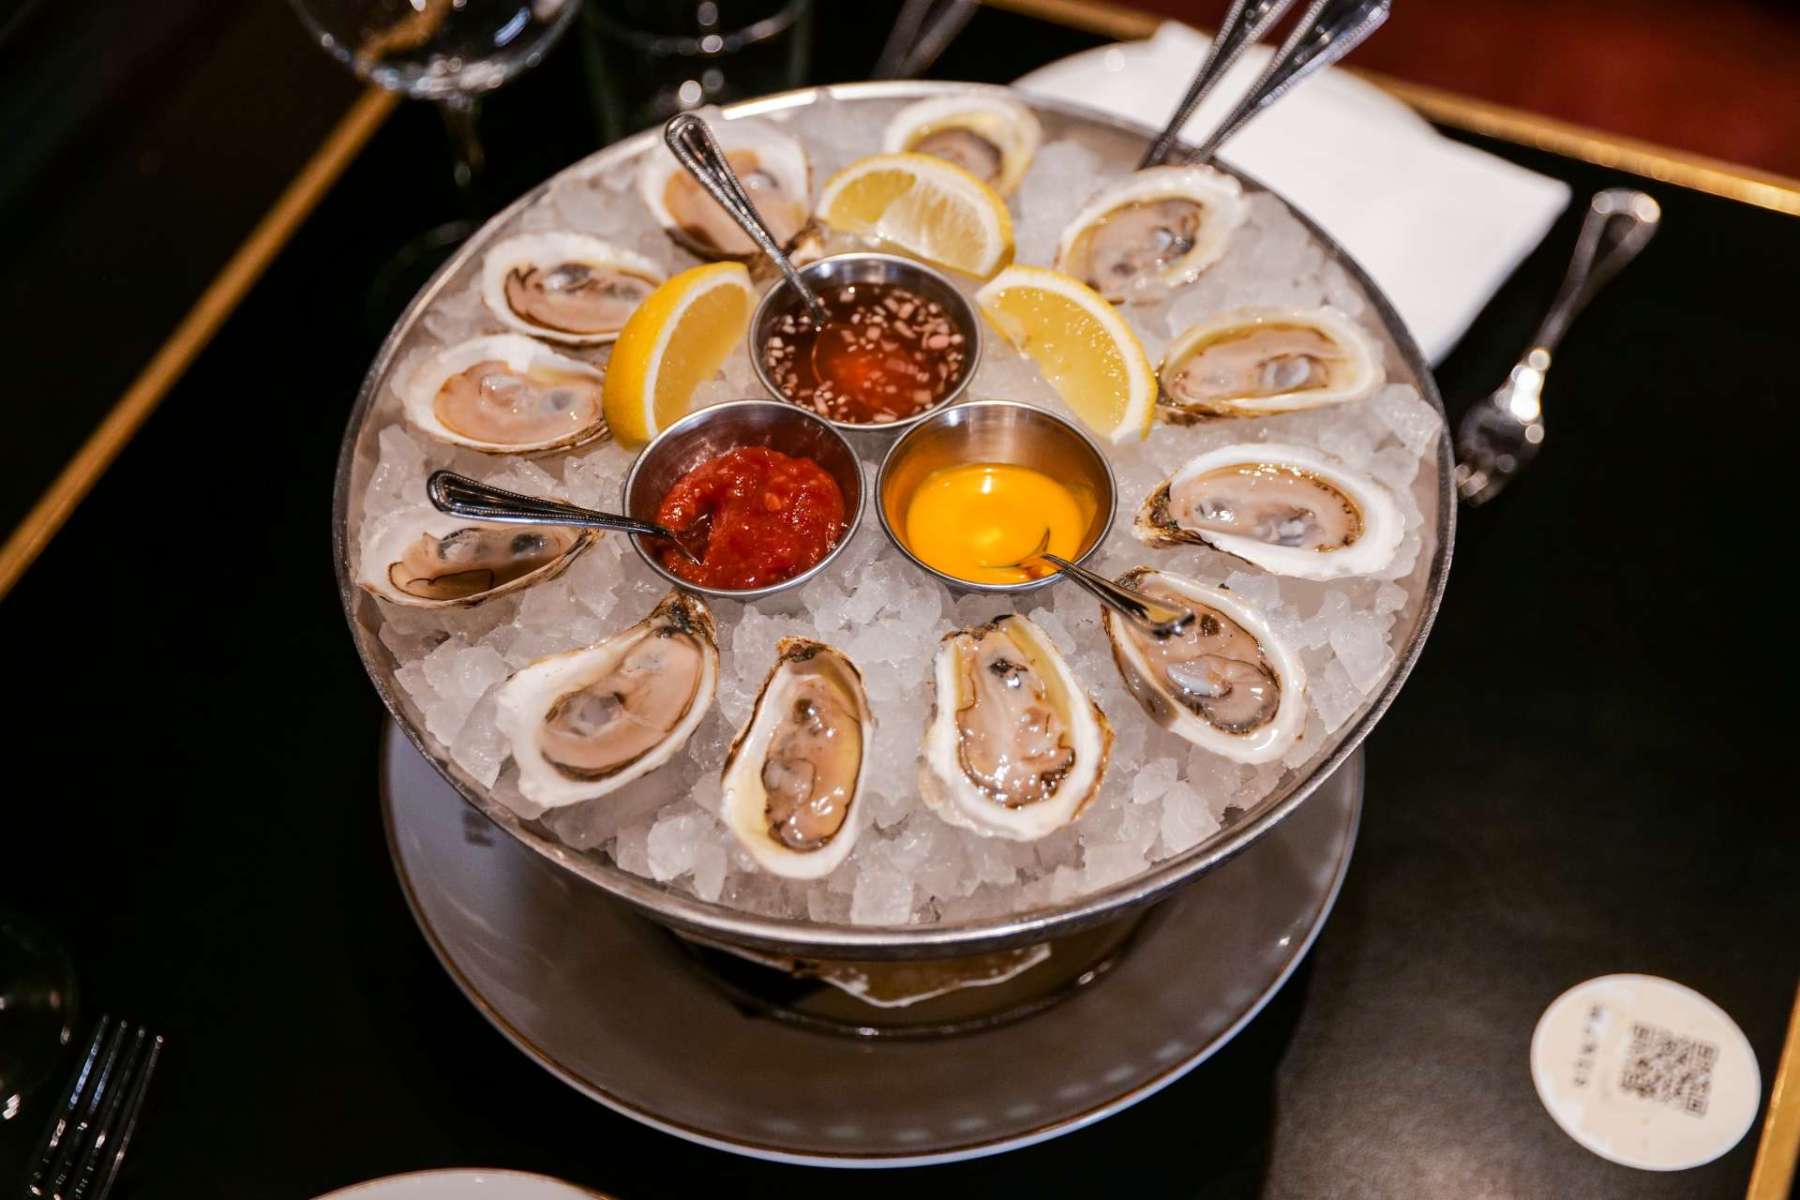 francois frankie oysters in Chicago 